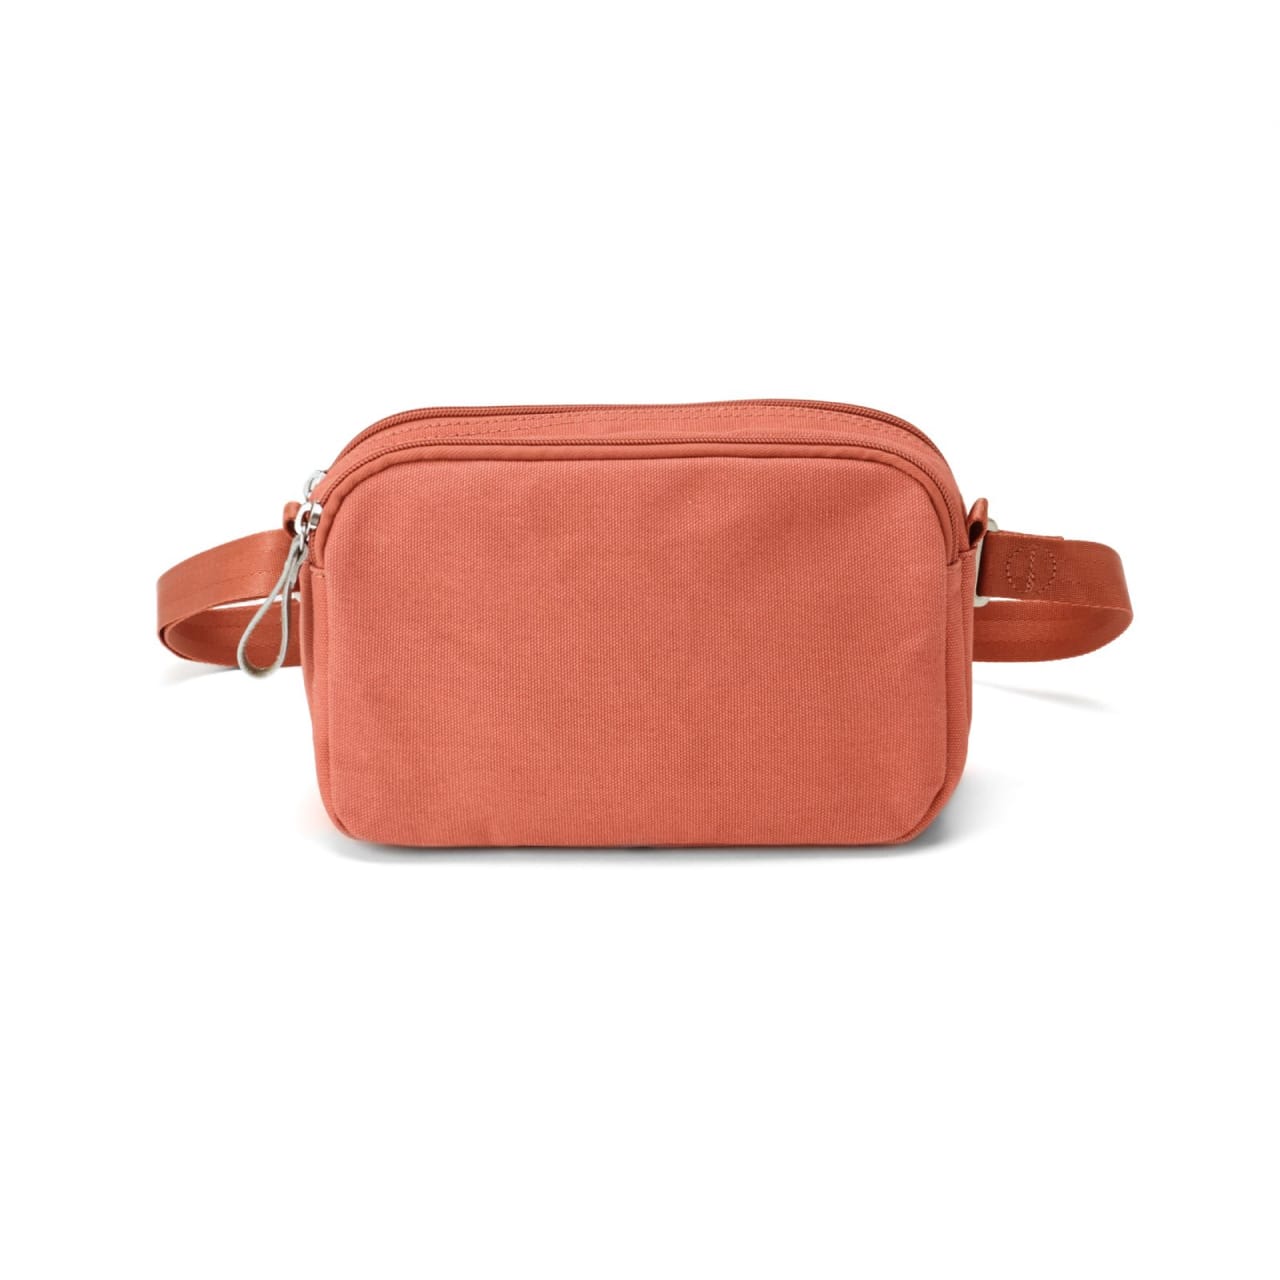 Salmon orange fabric pouch with match zipper, gray zipper pull, and adjustable hip belt.